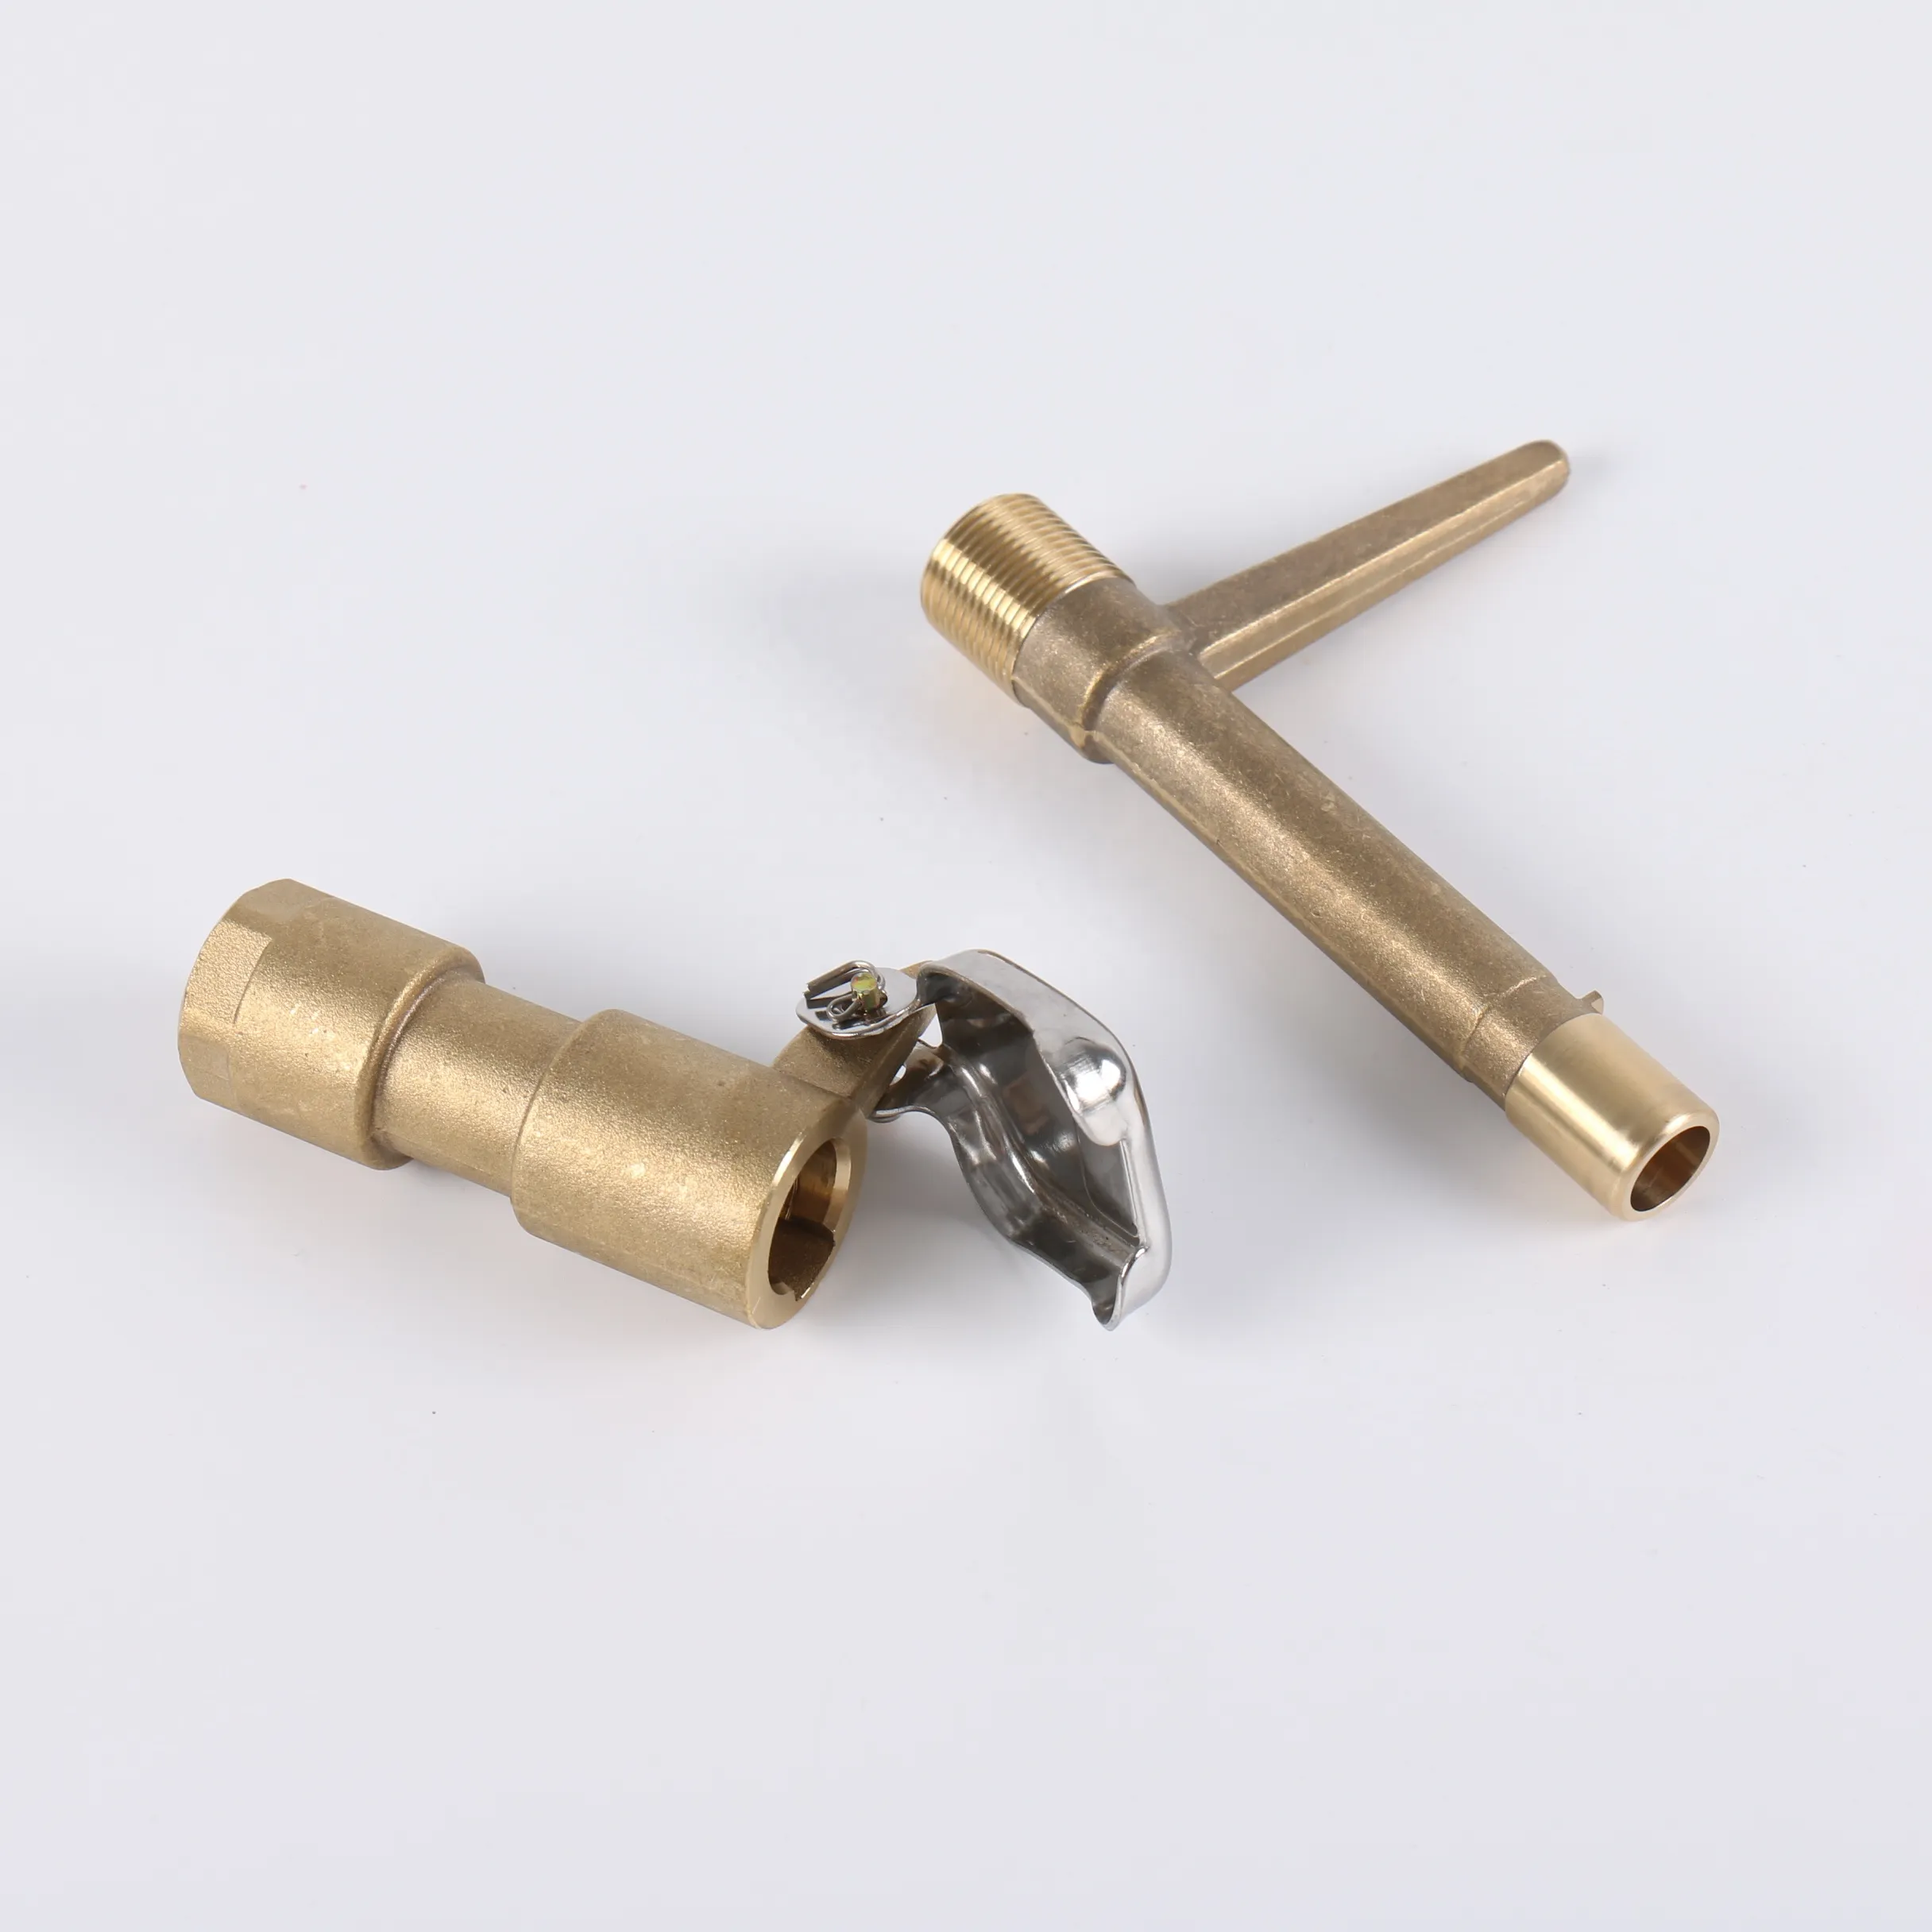 Brass sprinkler head coupling valve to get water fast 3/4" and 1"